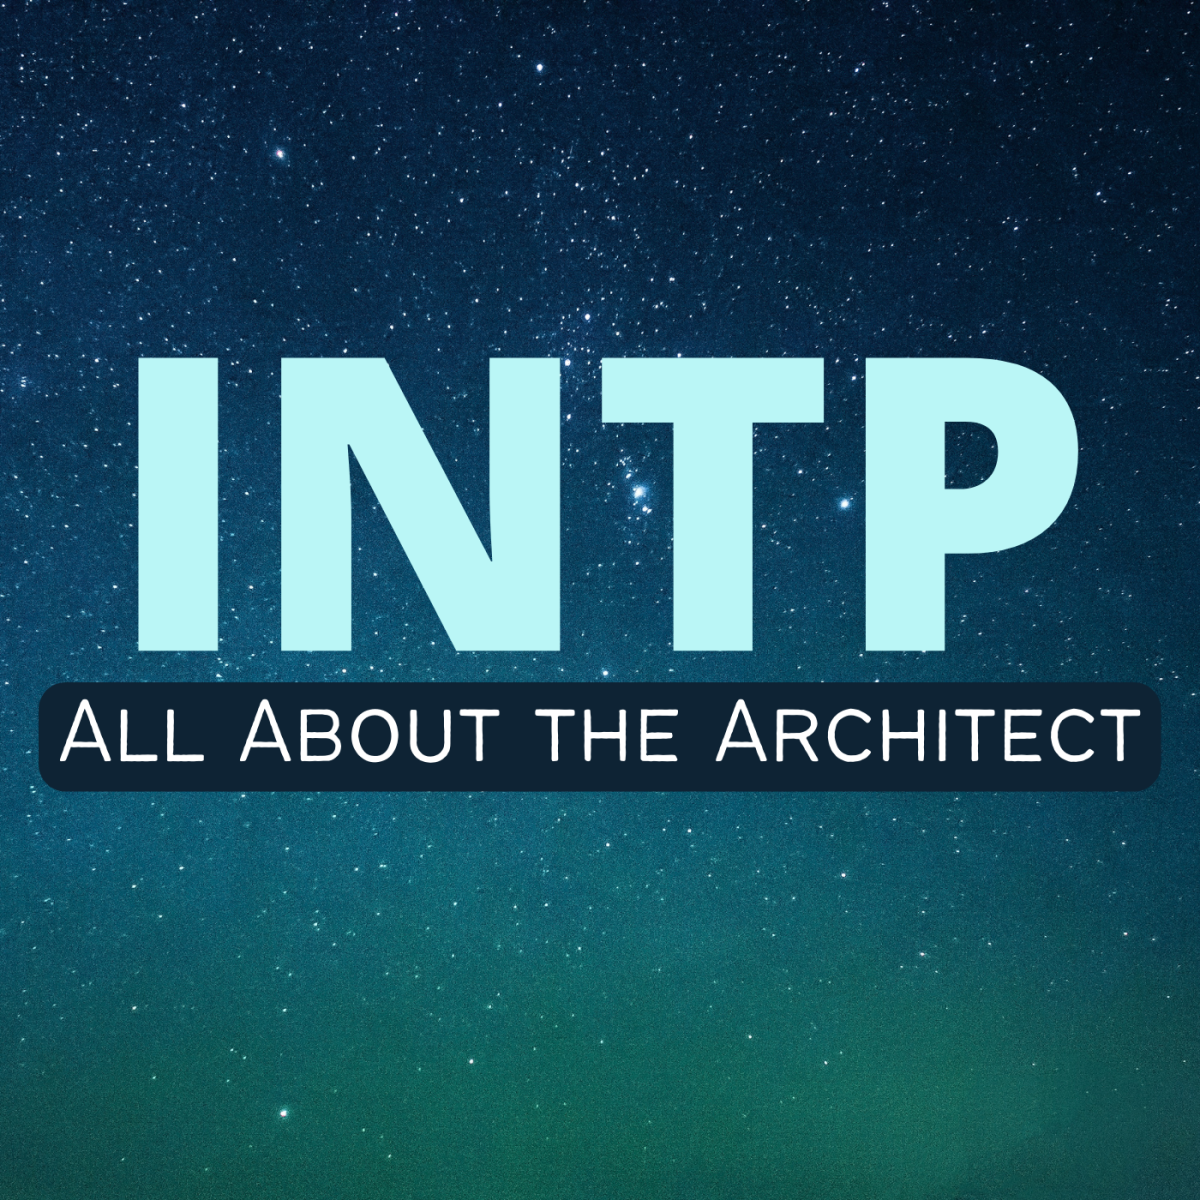 Learn all about the INTP personality type in Myers-Briggs theory. This type is known as the architect, thinker, or logician.